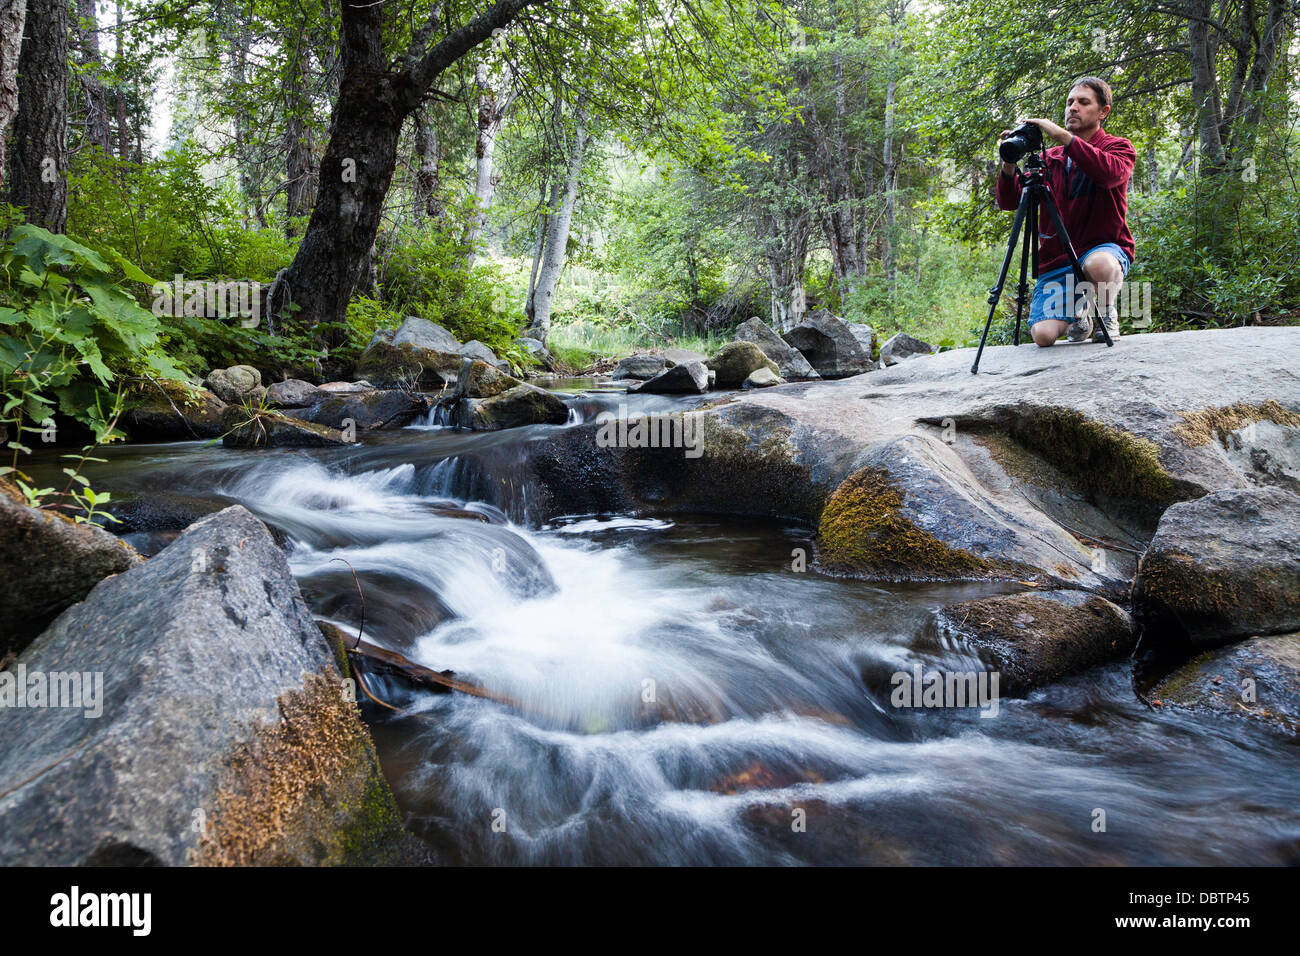 Photographer photographing flowing forest stream Stock Photo